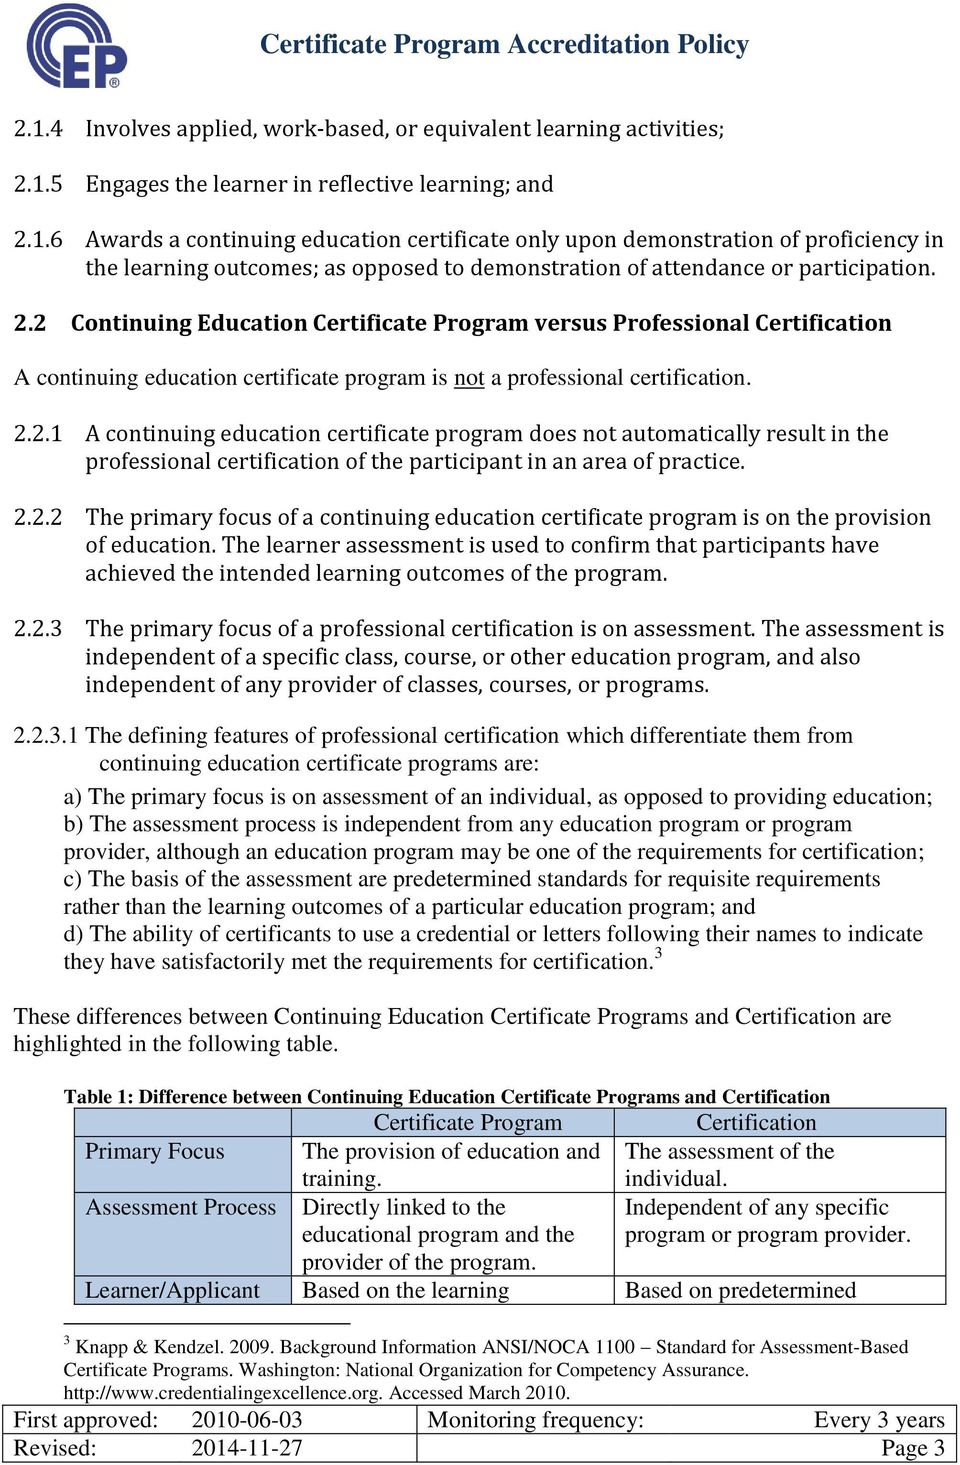 2.2.2 The primary focus of a continuing education certificate program is on the provision of education.